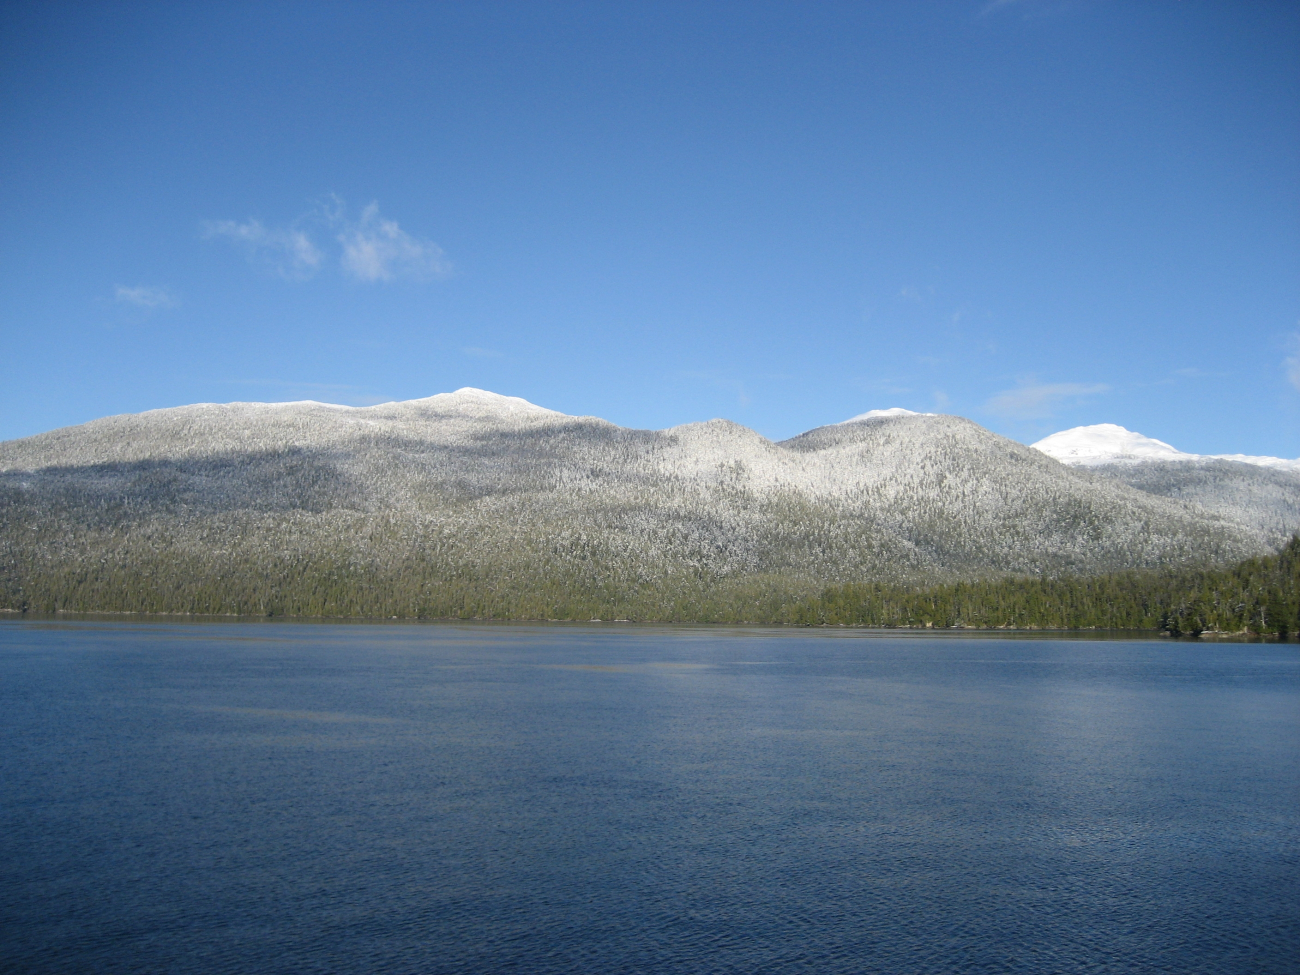 A sprinkling of snow at water level with mountains covered at higher elevations